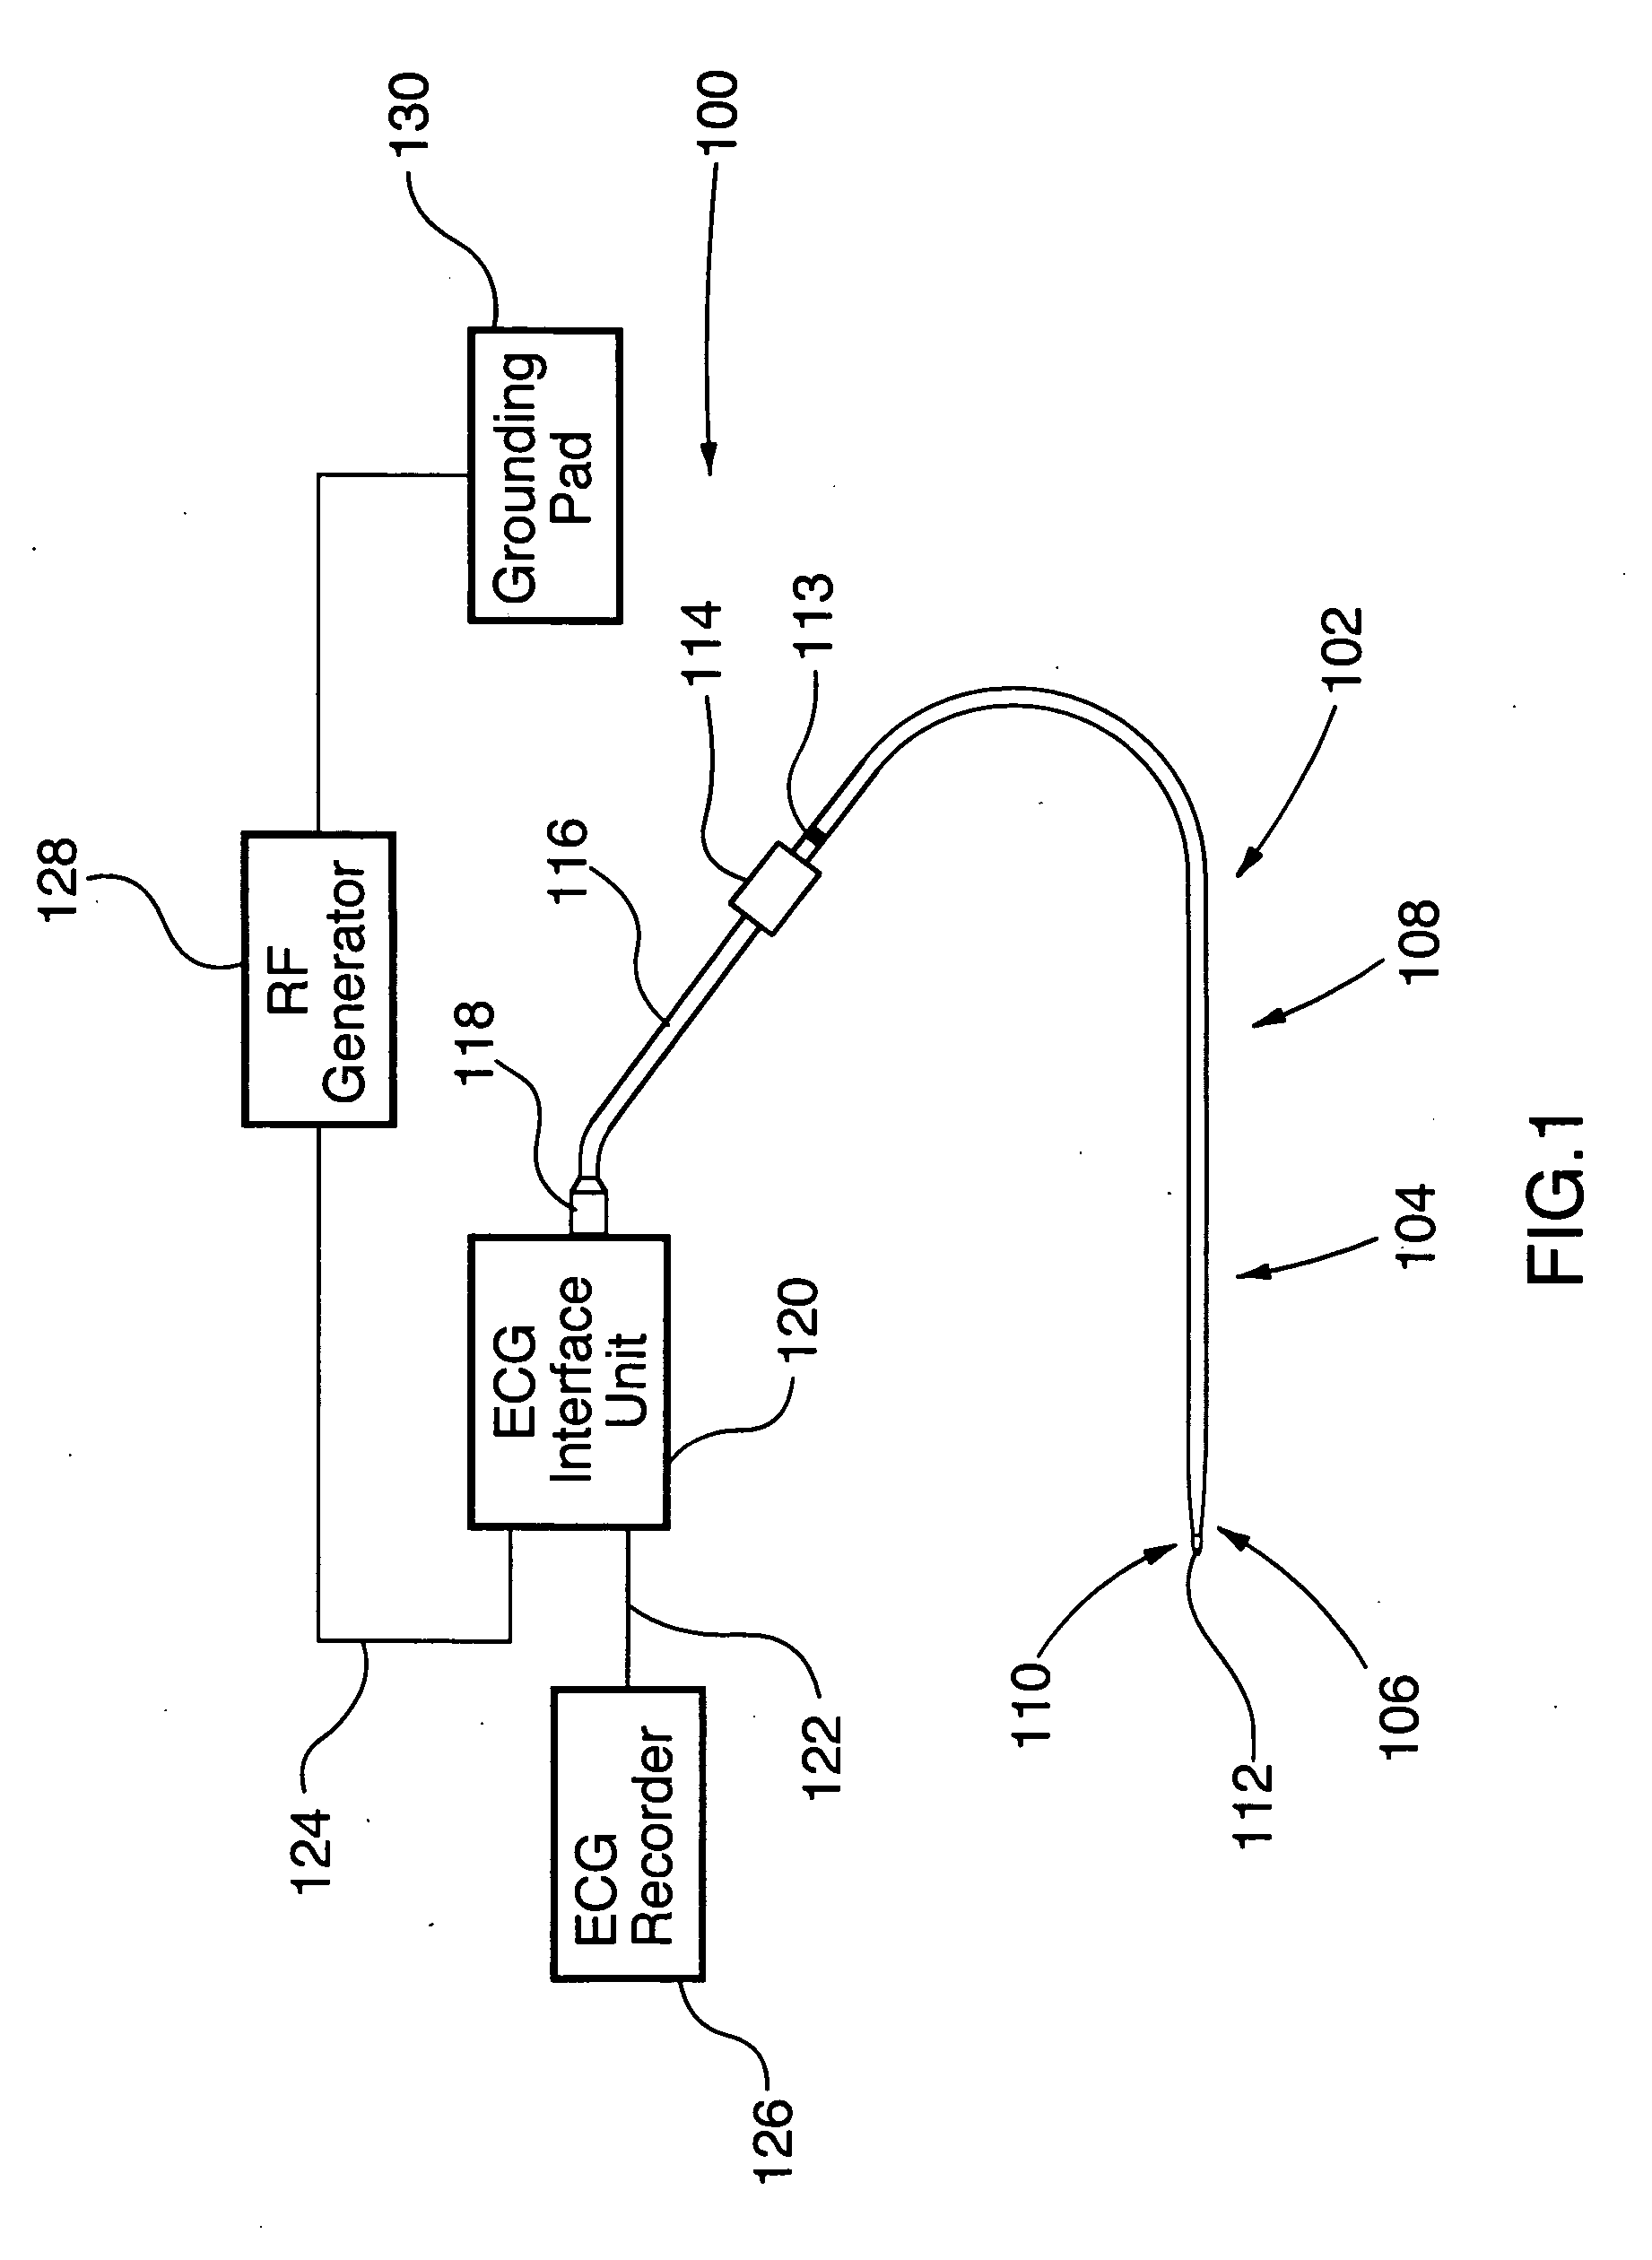 Surgical perforation device with electrocardiogram (ECG) monitoring ability and method of using ECG to position a surgical perforation device